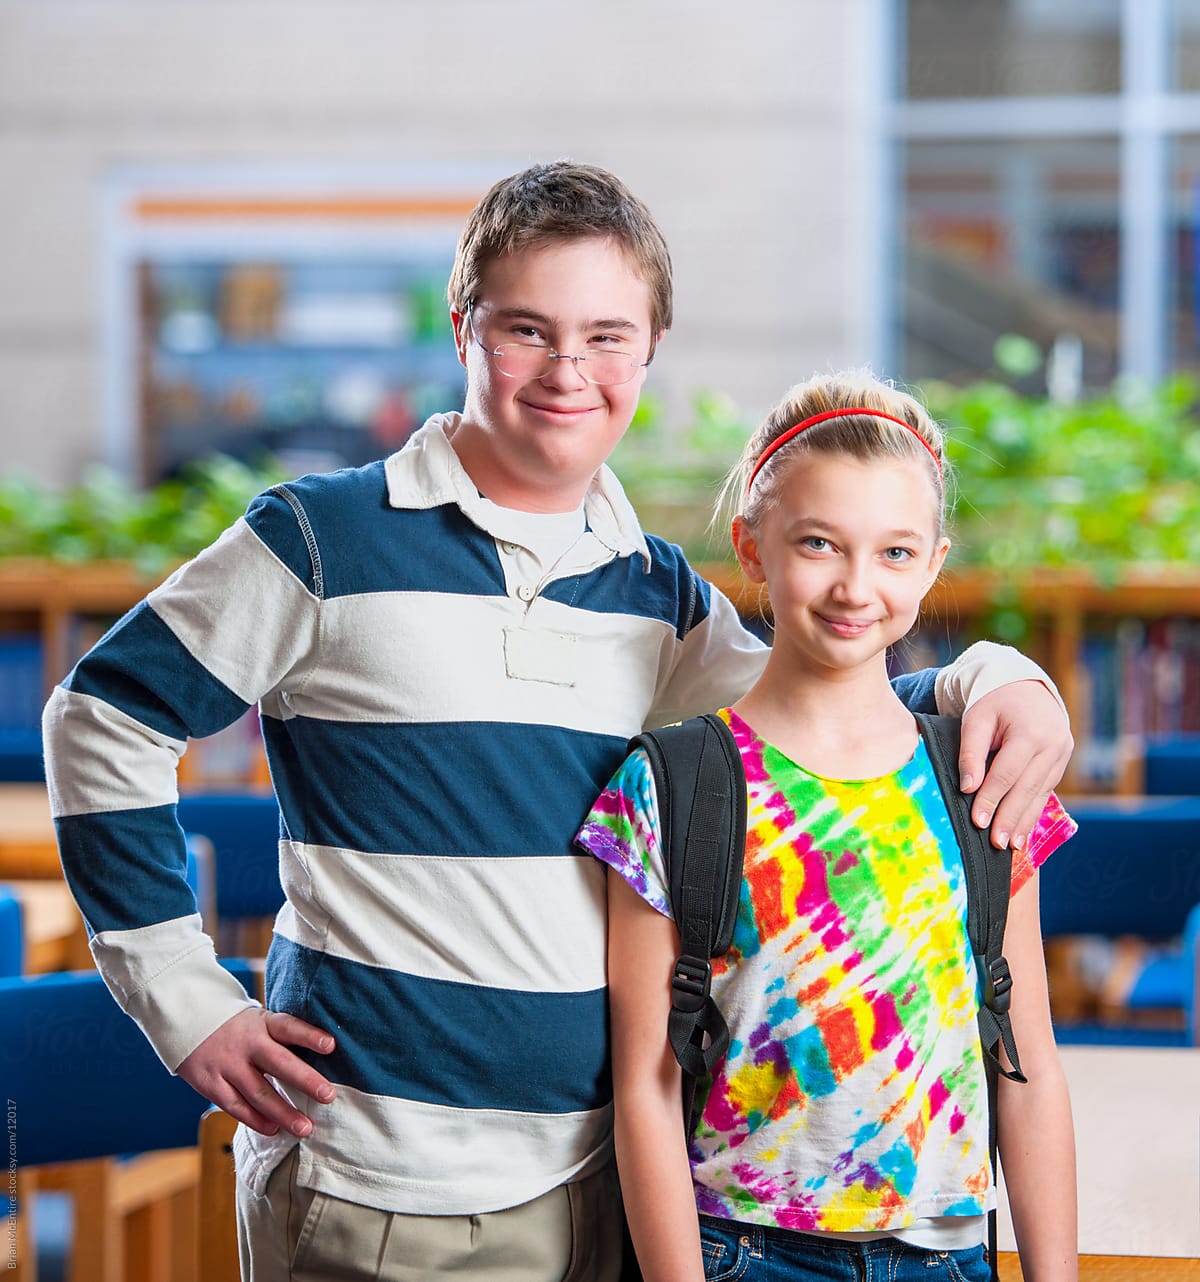 Middle School Girl and High School Boy with Down Syndrome Together in Library